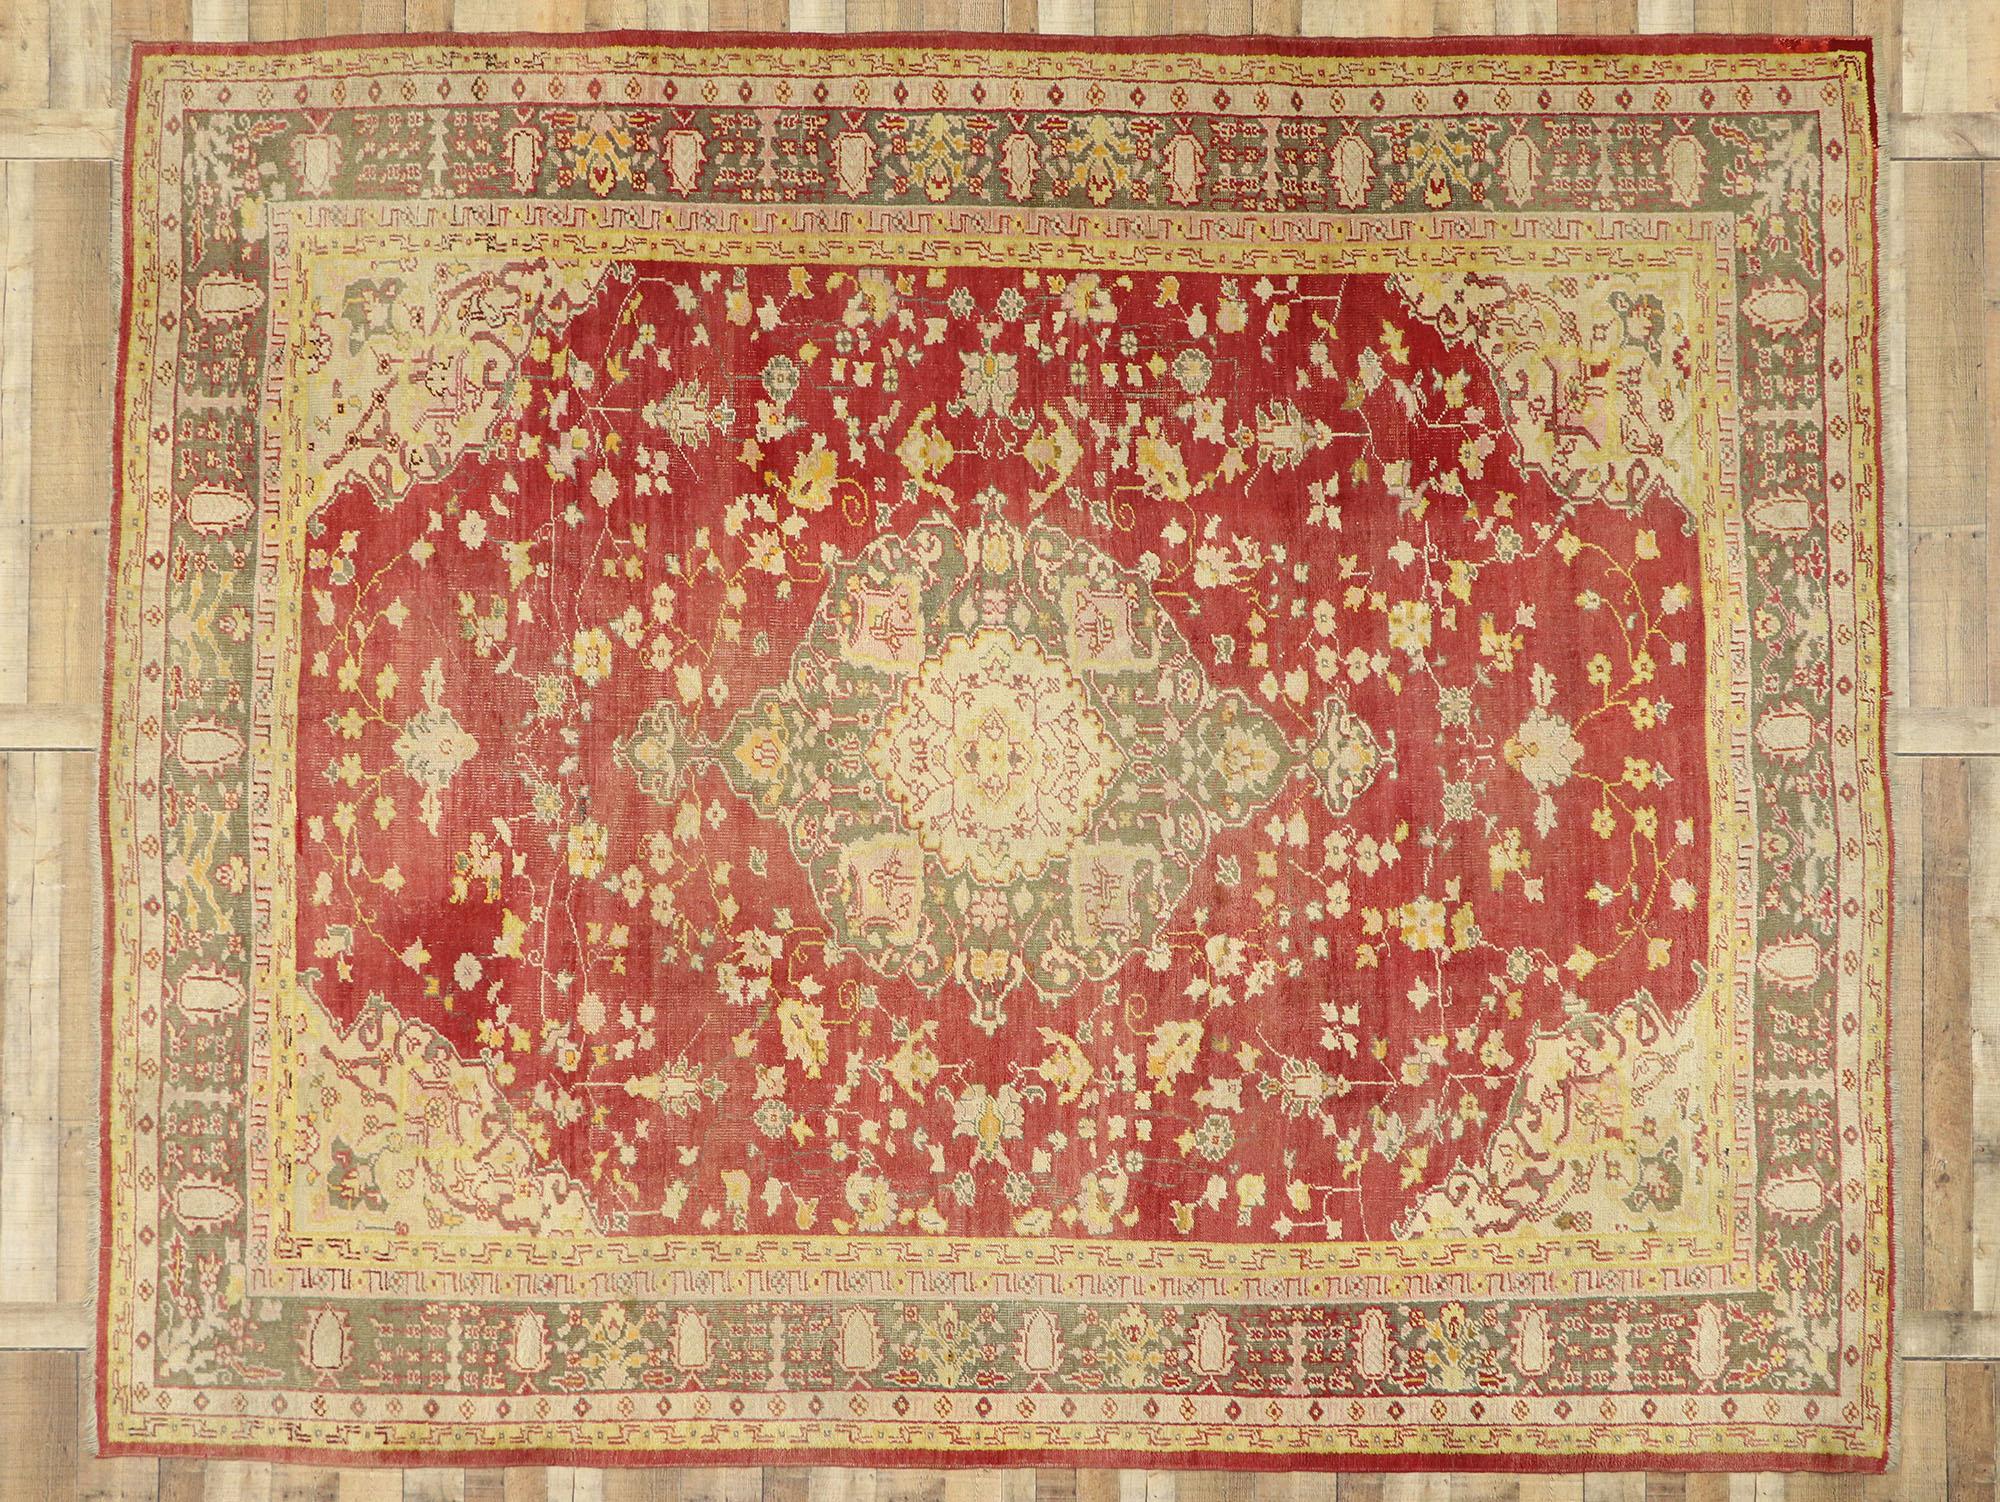 76787 Distressed Antique Turkish Oushak Area Rug with Rustic Arts & Crafts Style. This hand-knotted wool distressed antique Turkish Oushak features a cusped centre medallion flanked with palmette finials. The central medallion is surrounded by a